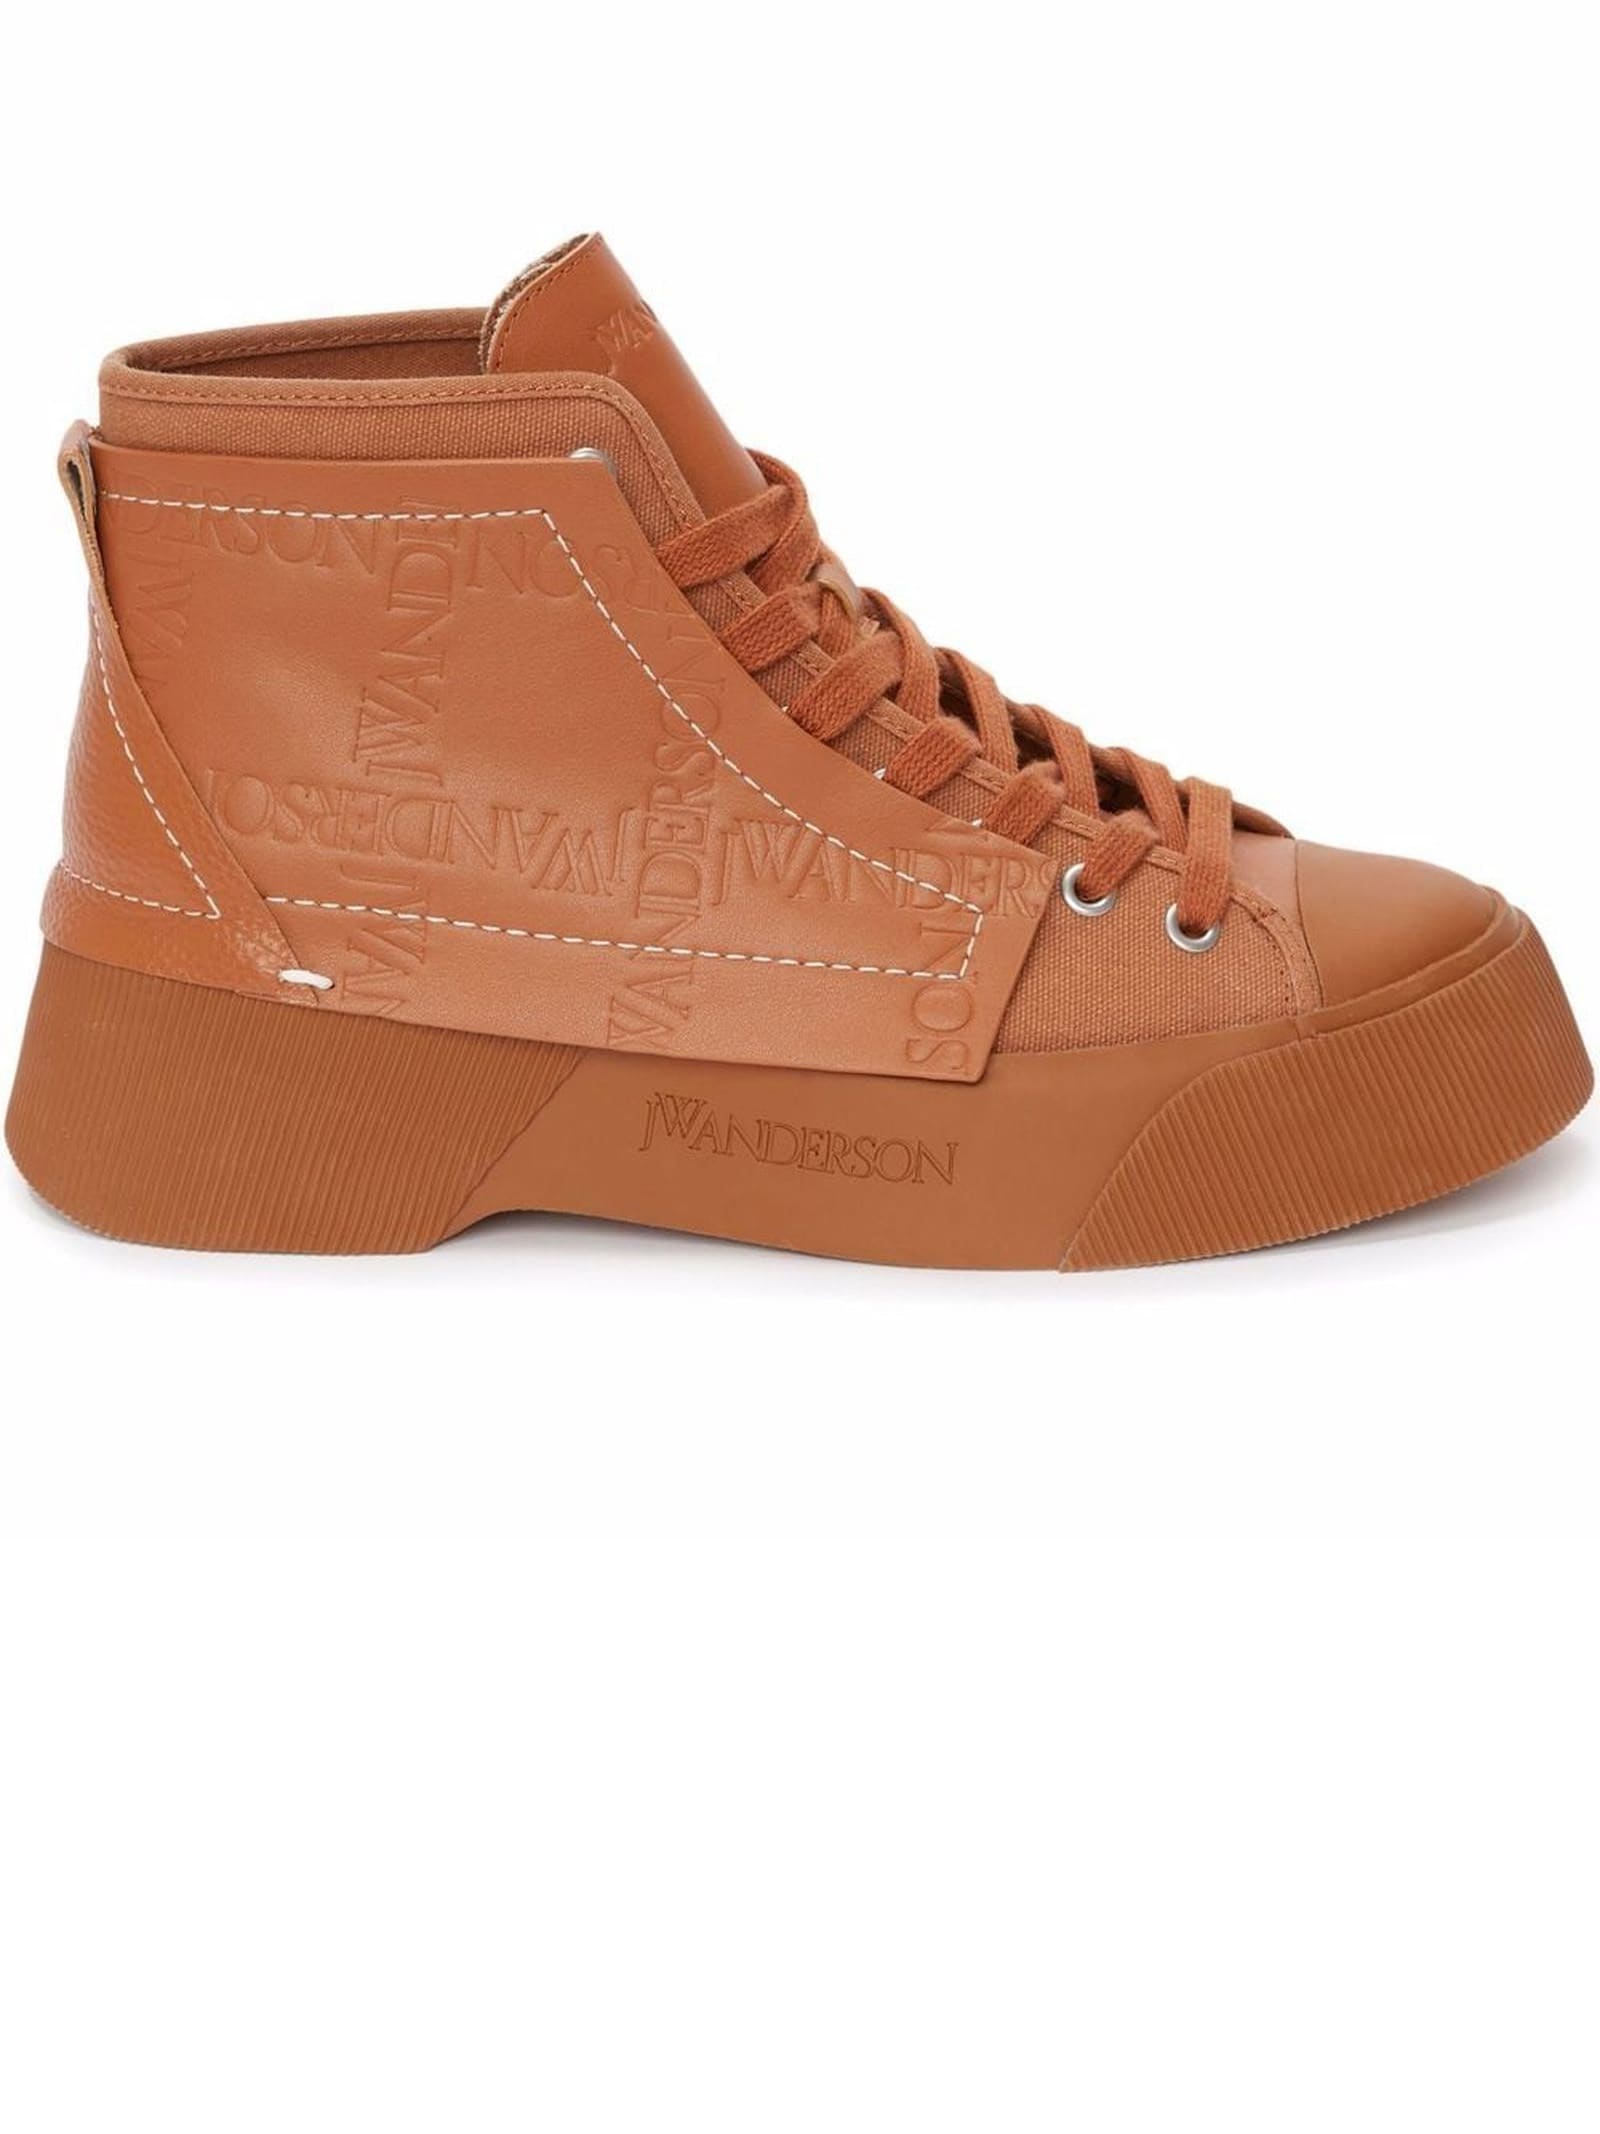 J.W. Anderson Sneakers In Brown Leather And Canvas